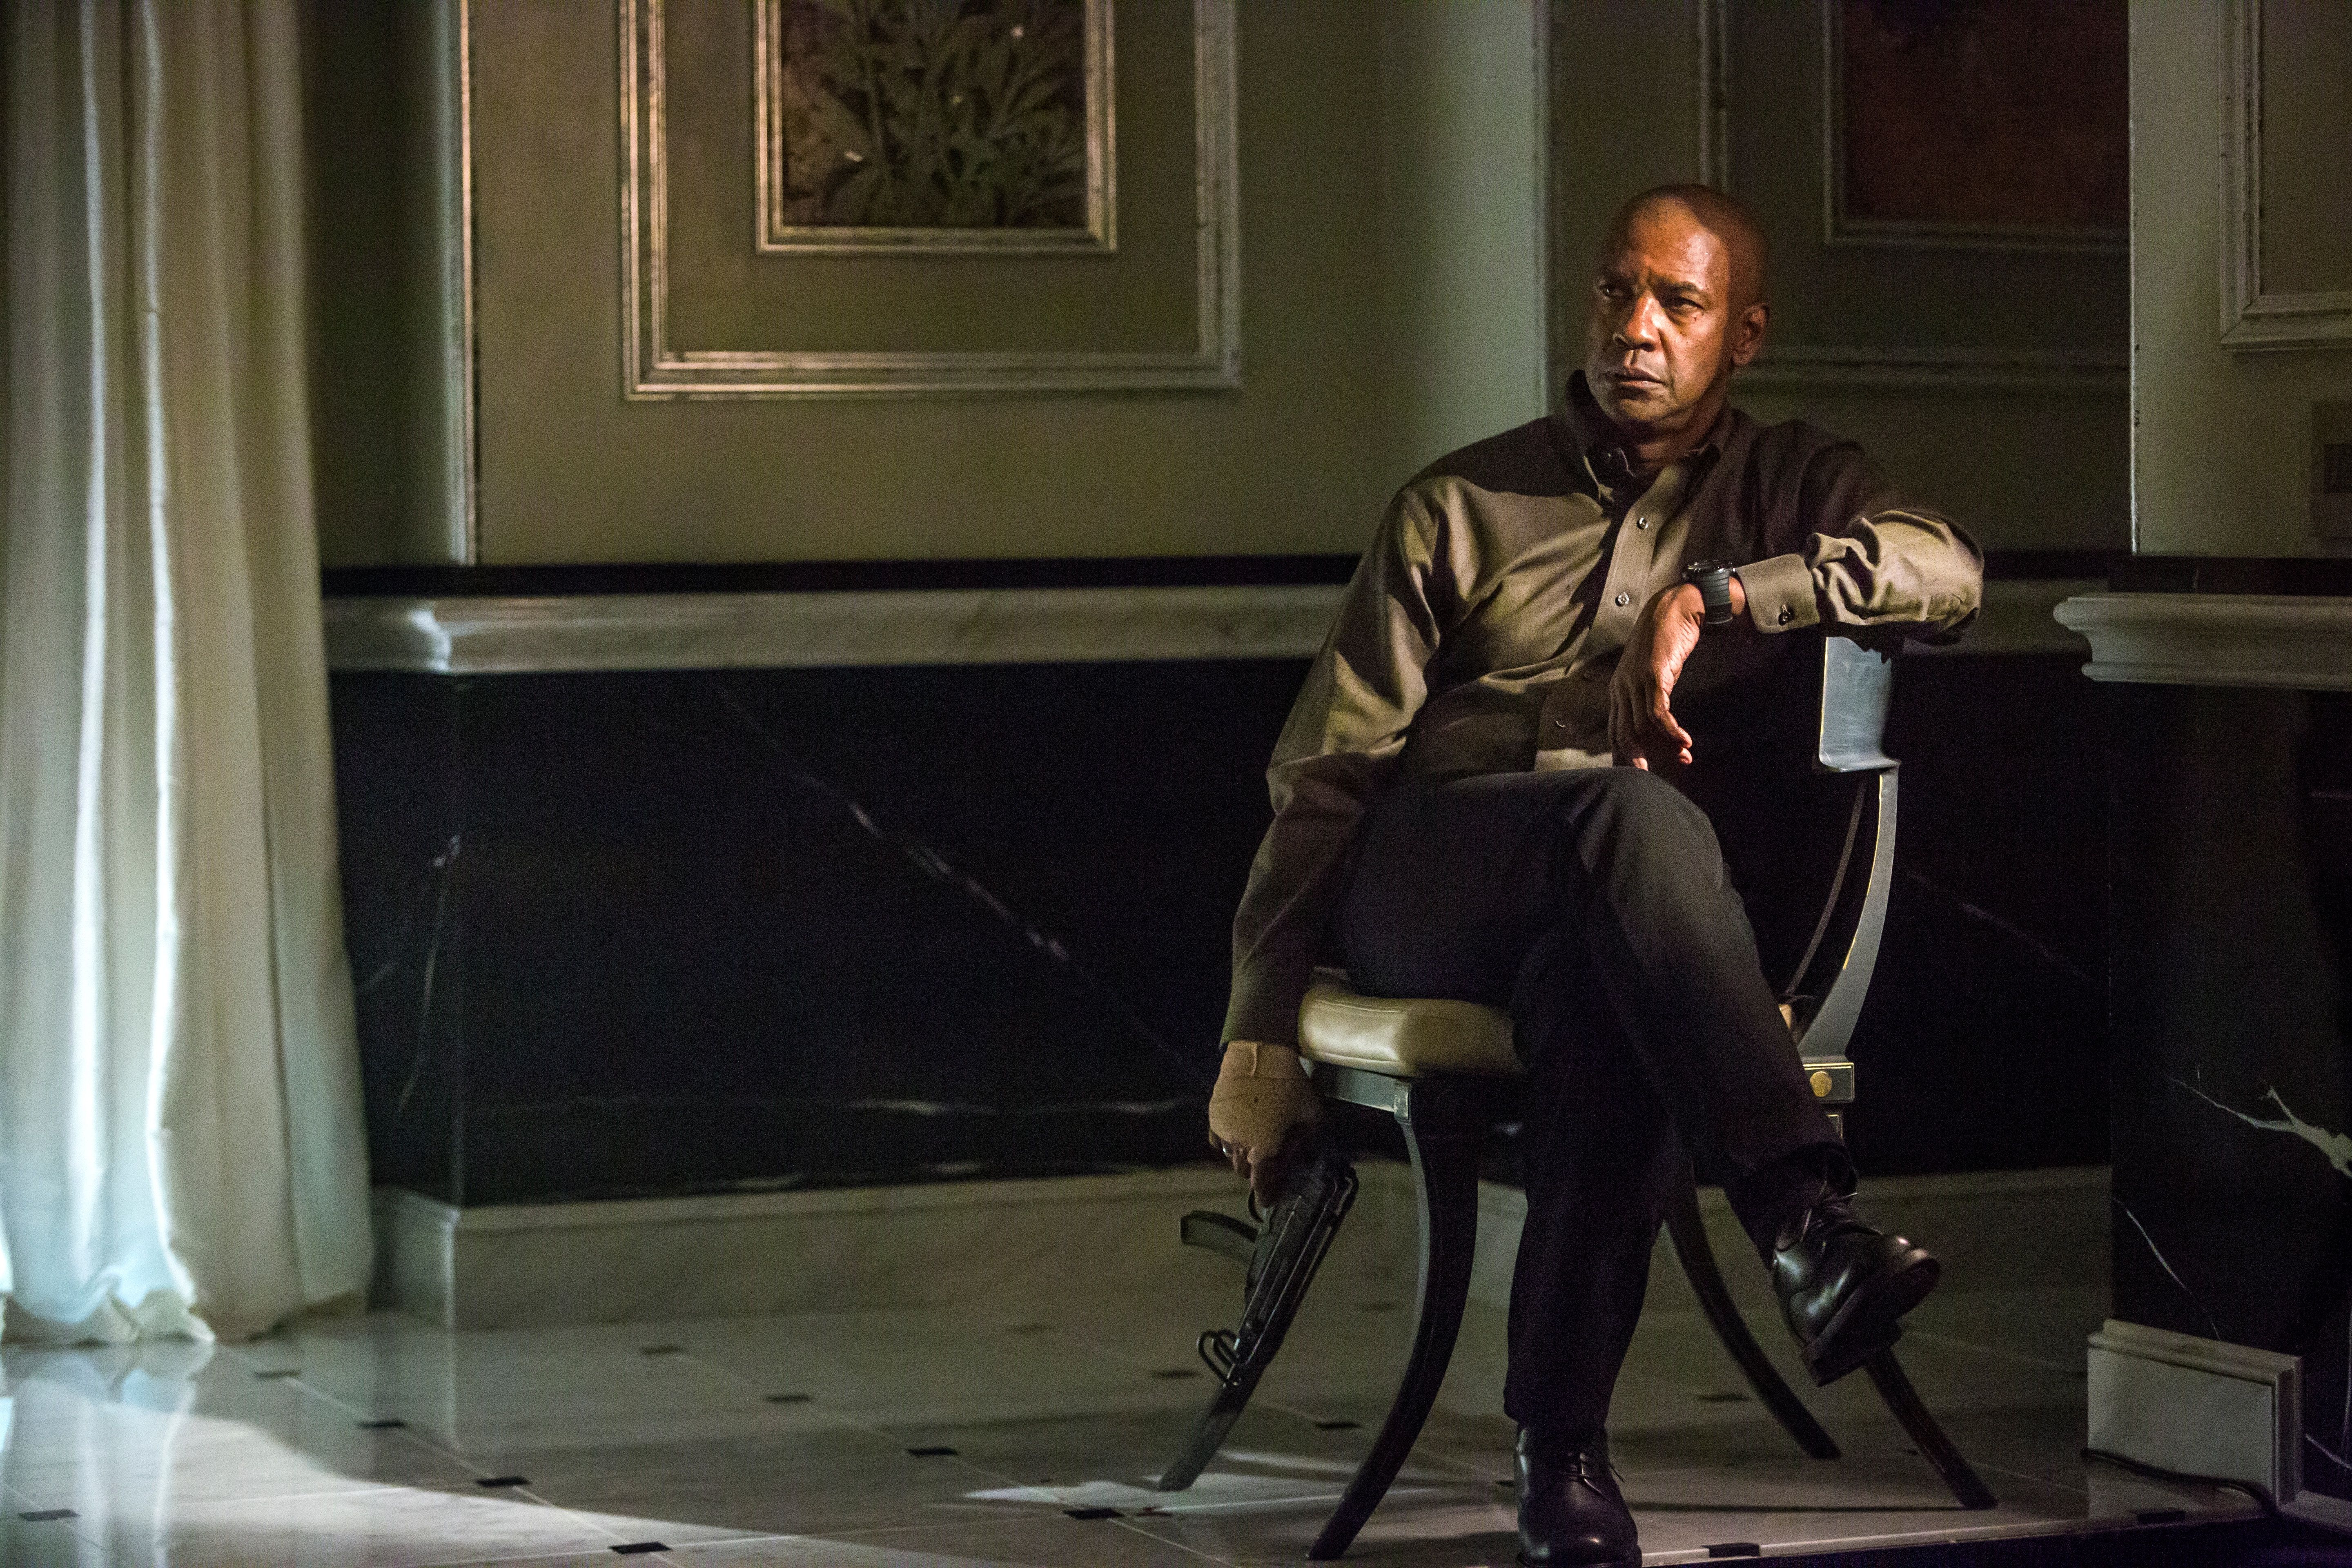 Movie The Equalizer HD Wallpaper | Background Image